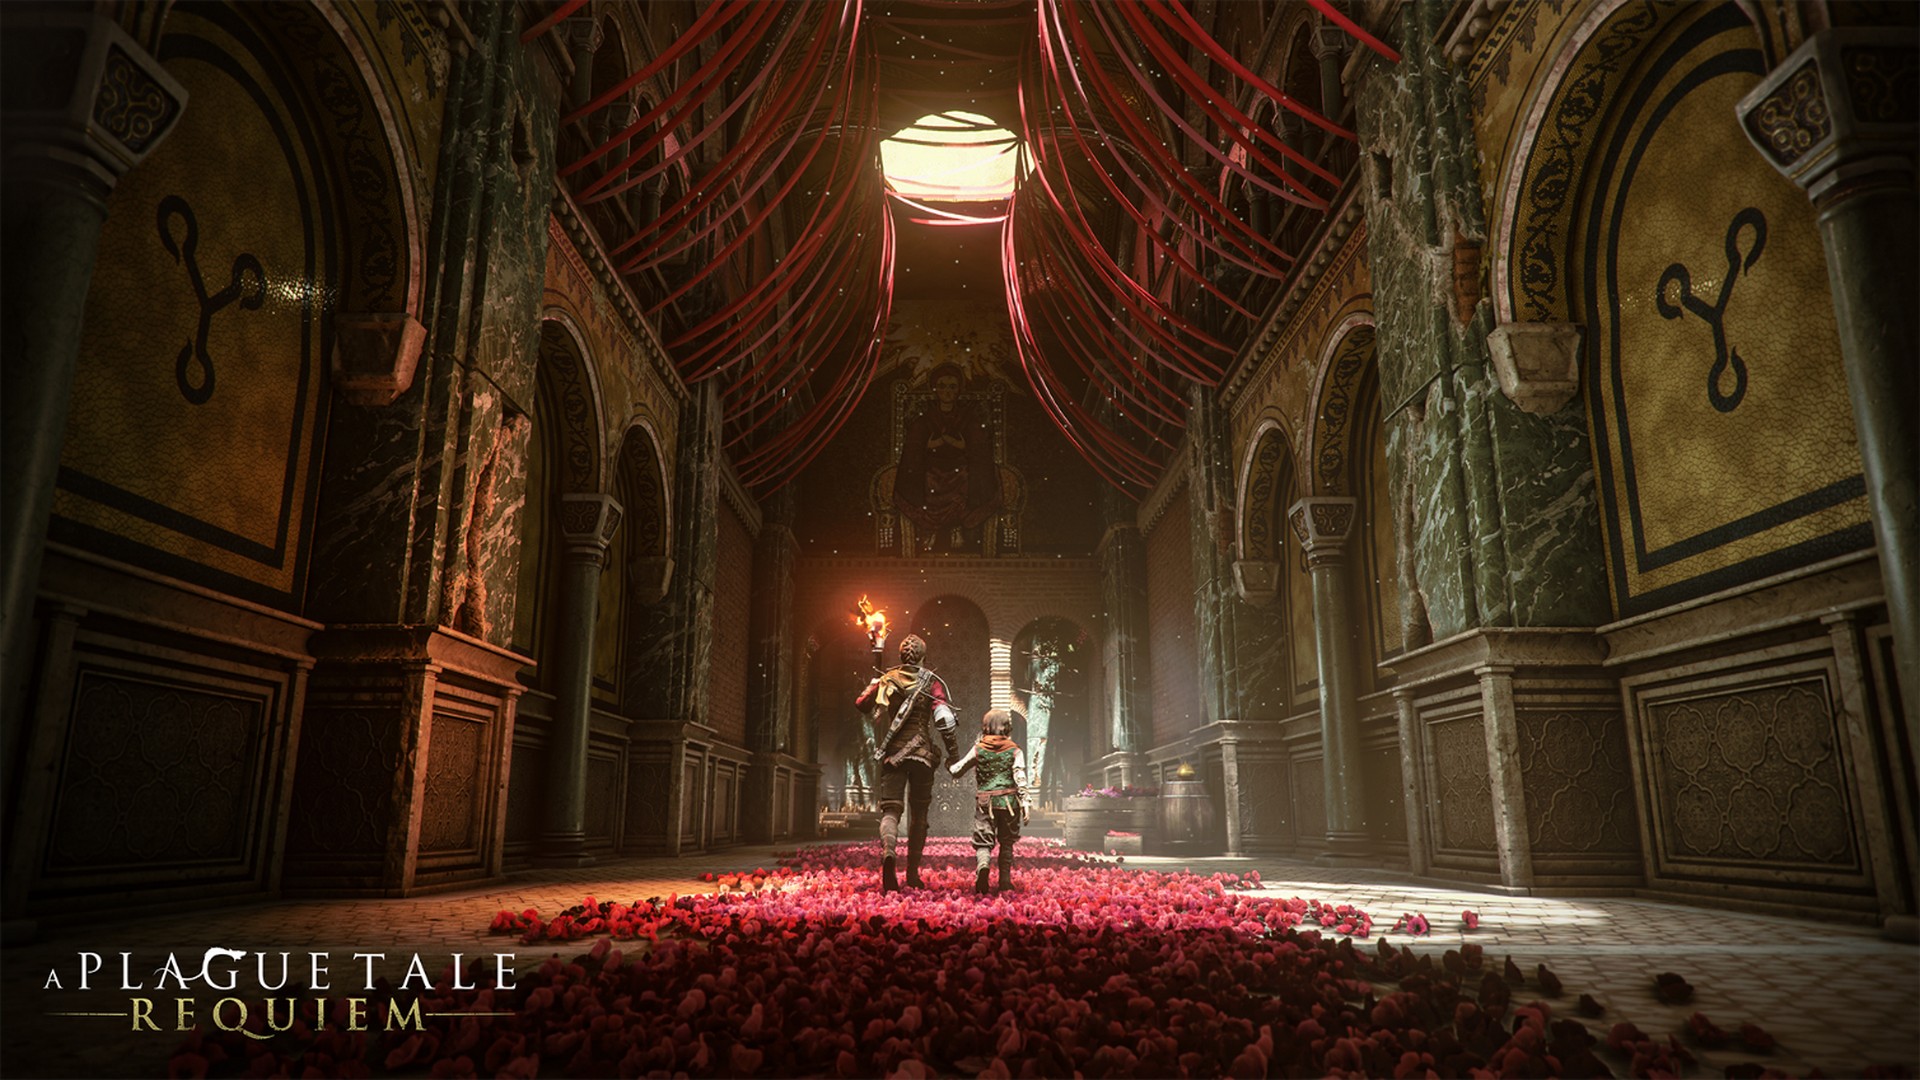 A Plague Tale: Requiem’s Performance Mode Is Live, With A 60 FPS Mode For Playstation 5 & Xbox Series X